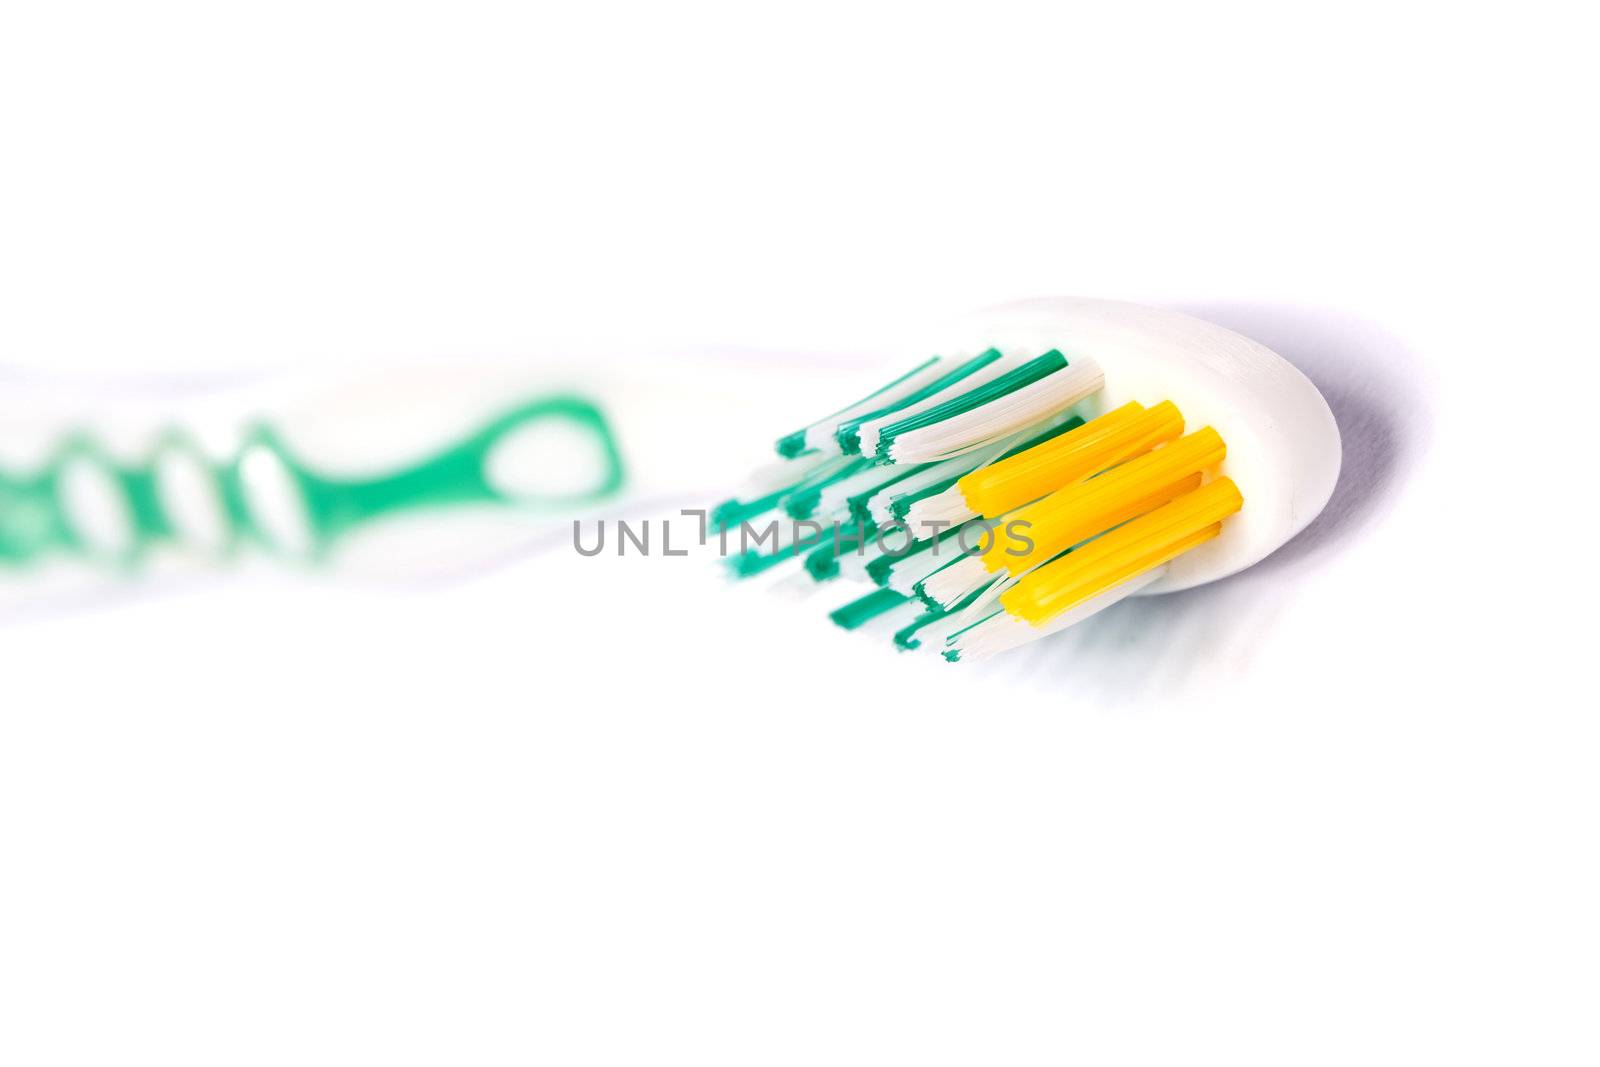 Close up view of a tooth brush isolated on a white background.